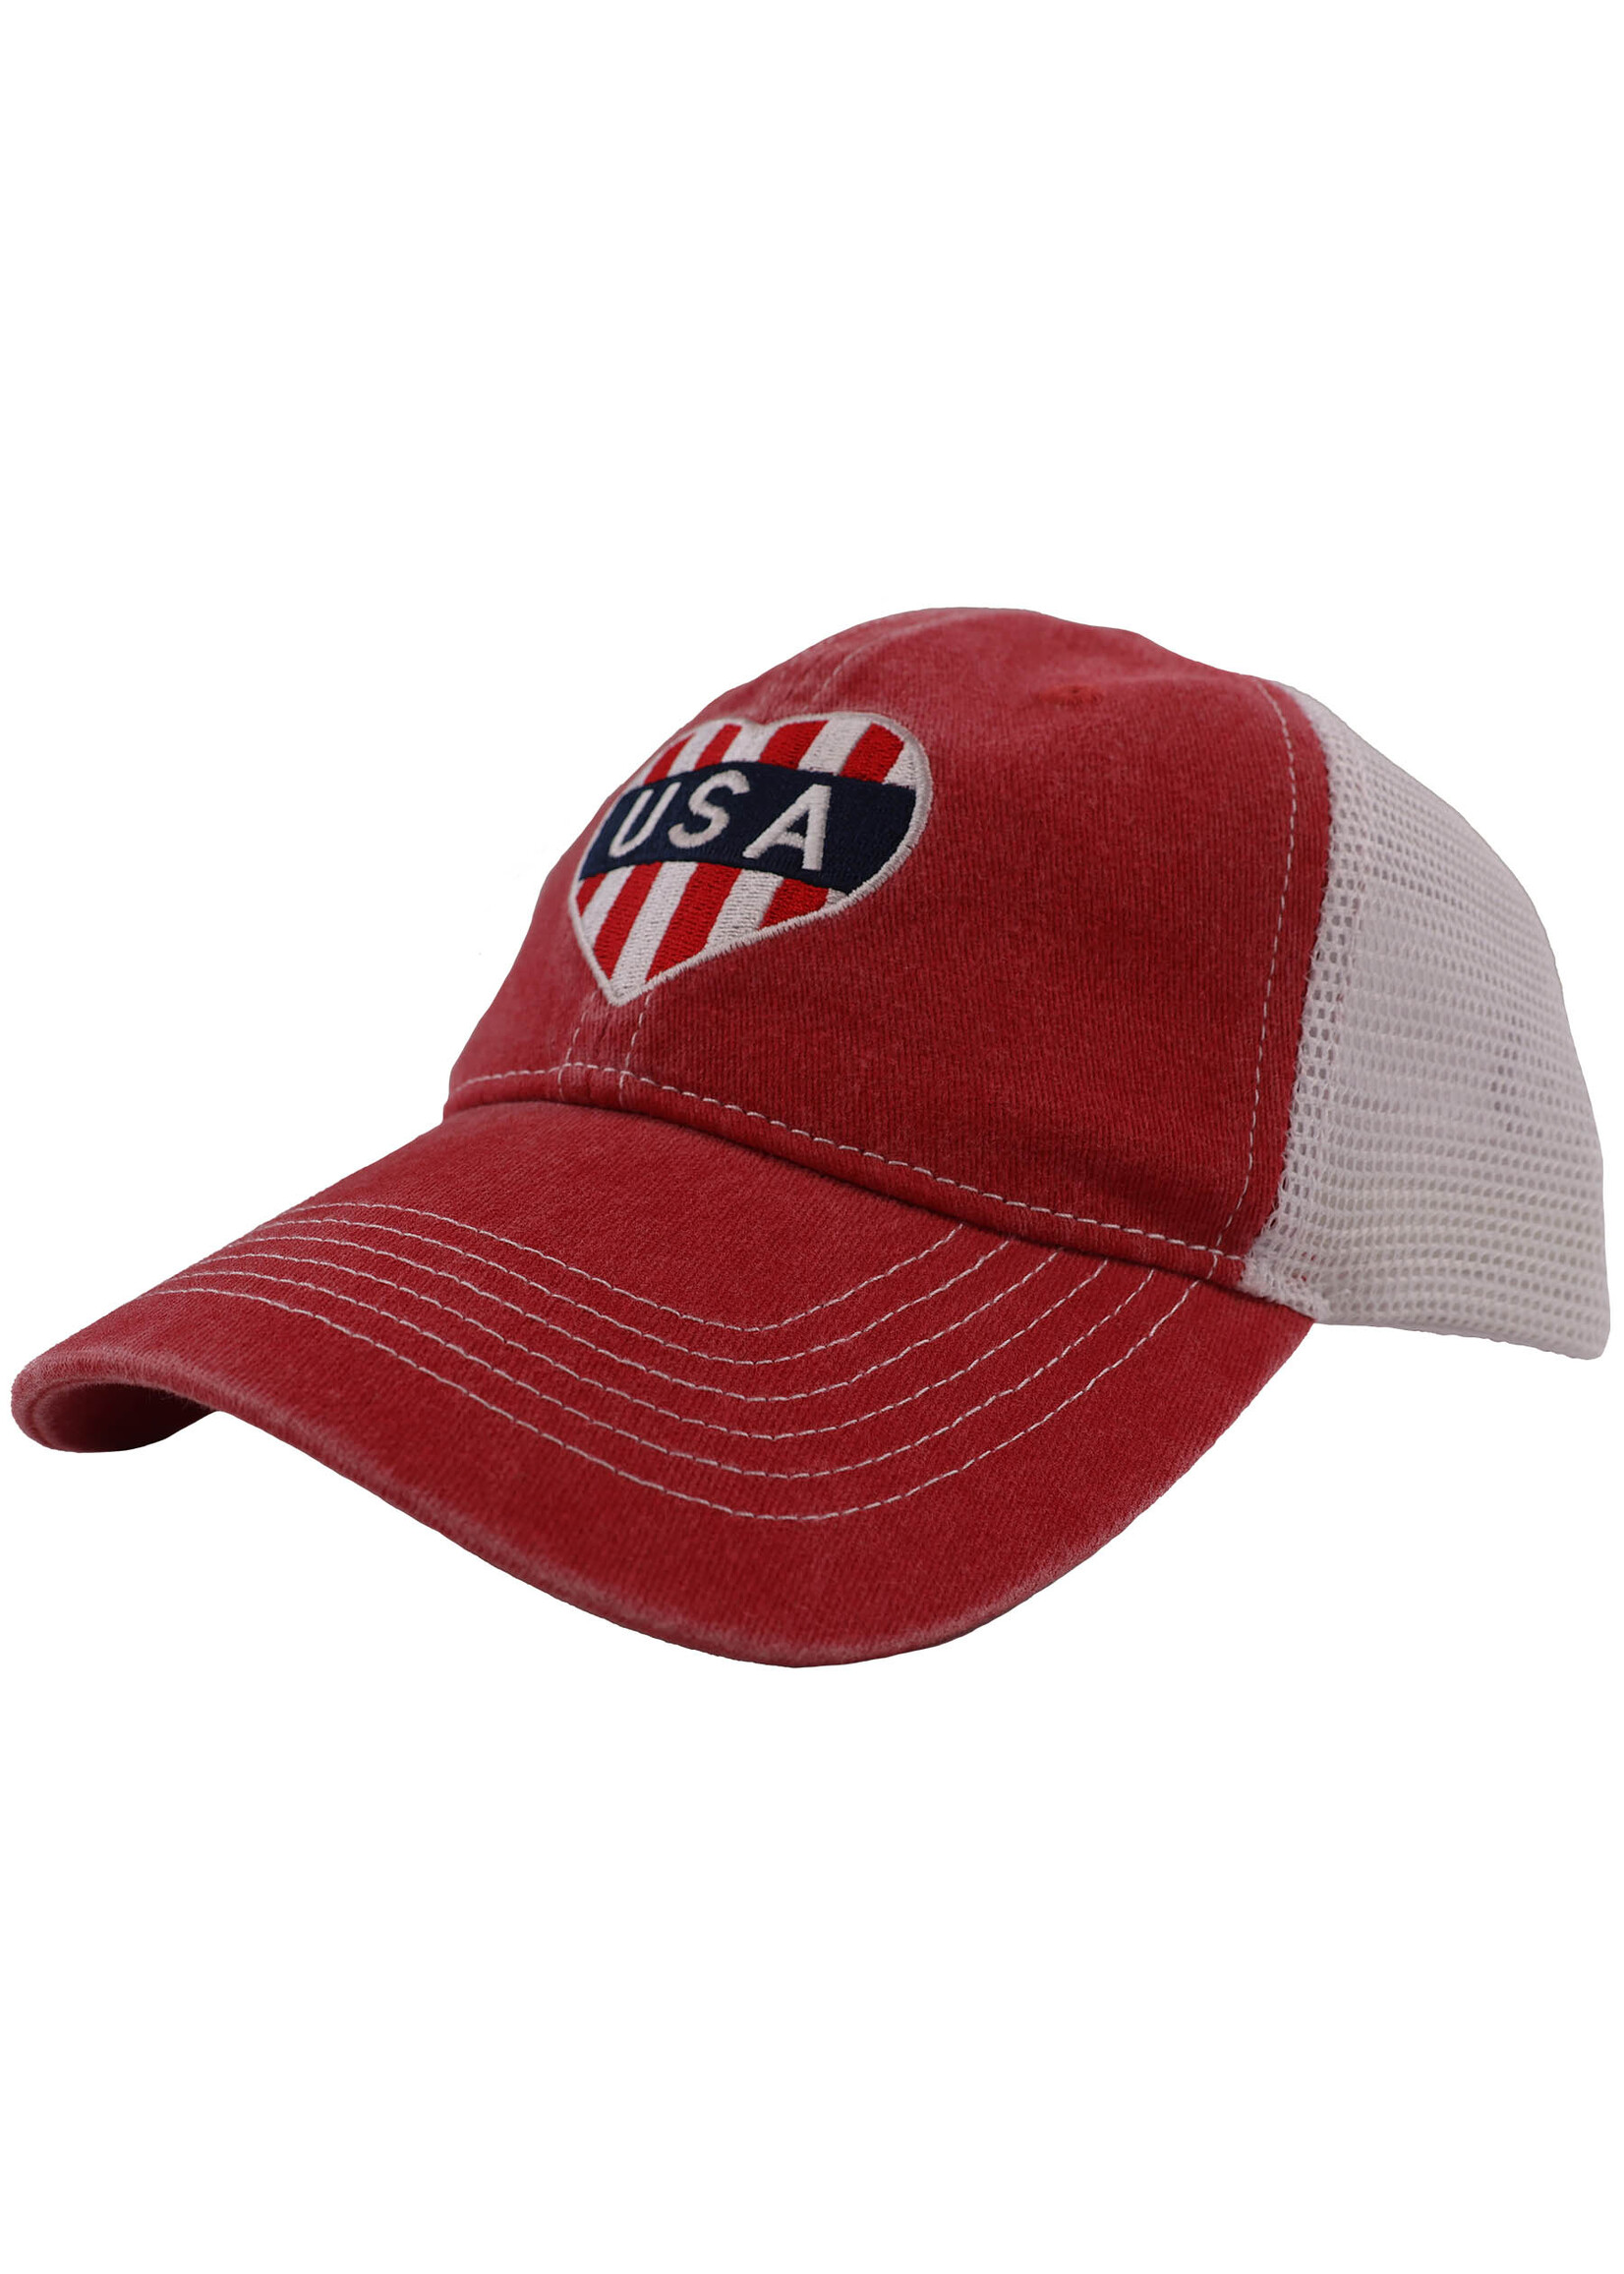 Simply Southern Collection 'USA' Hat- Red